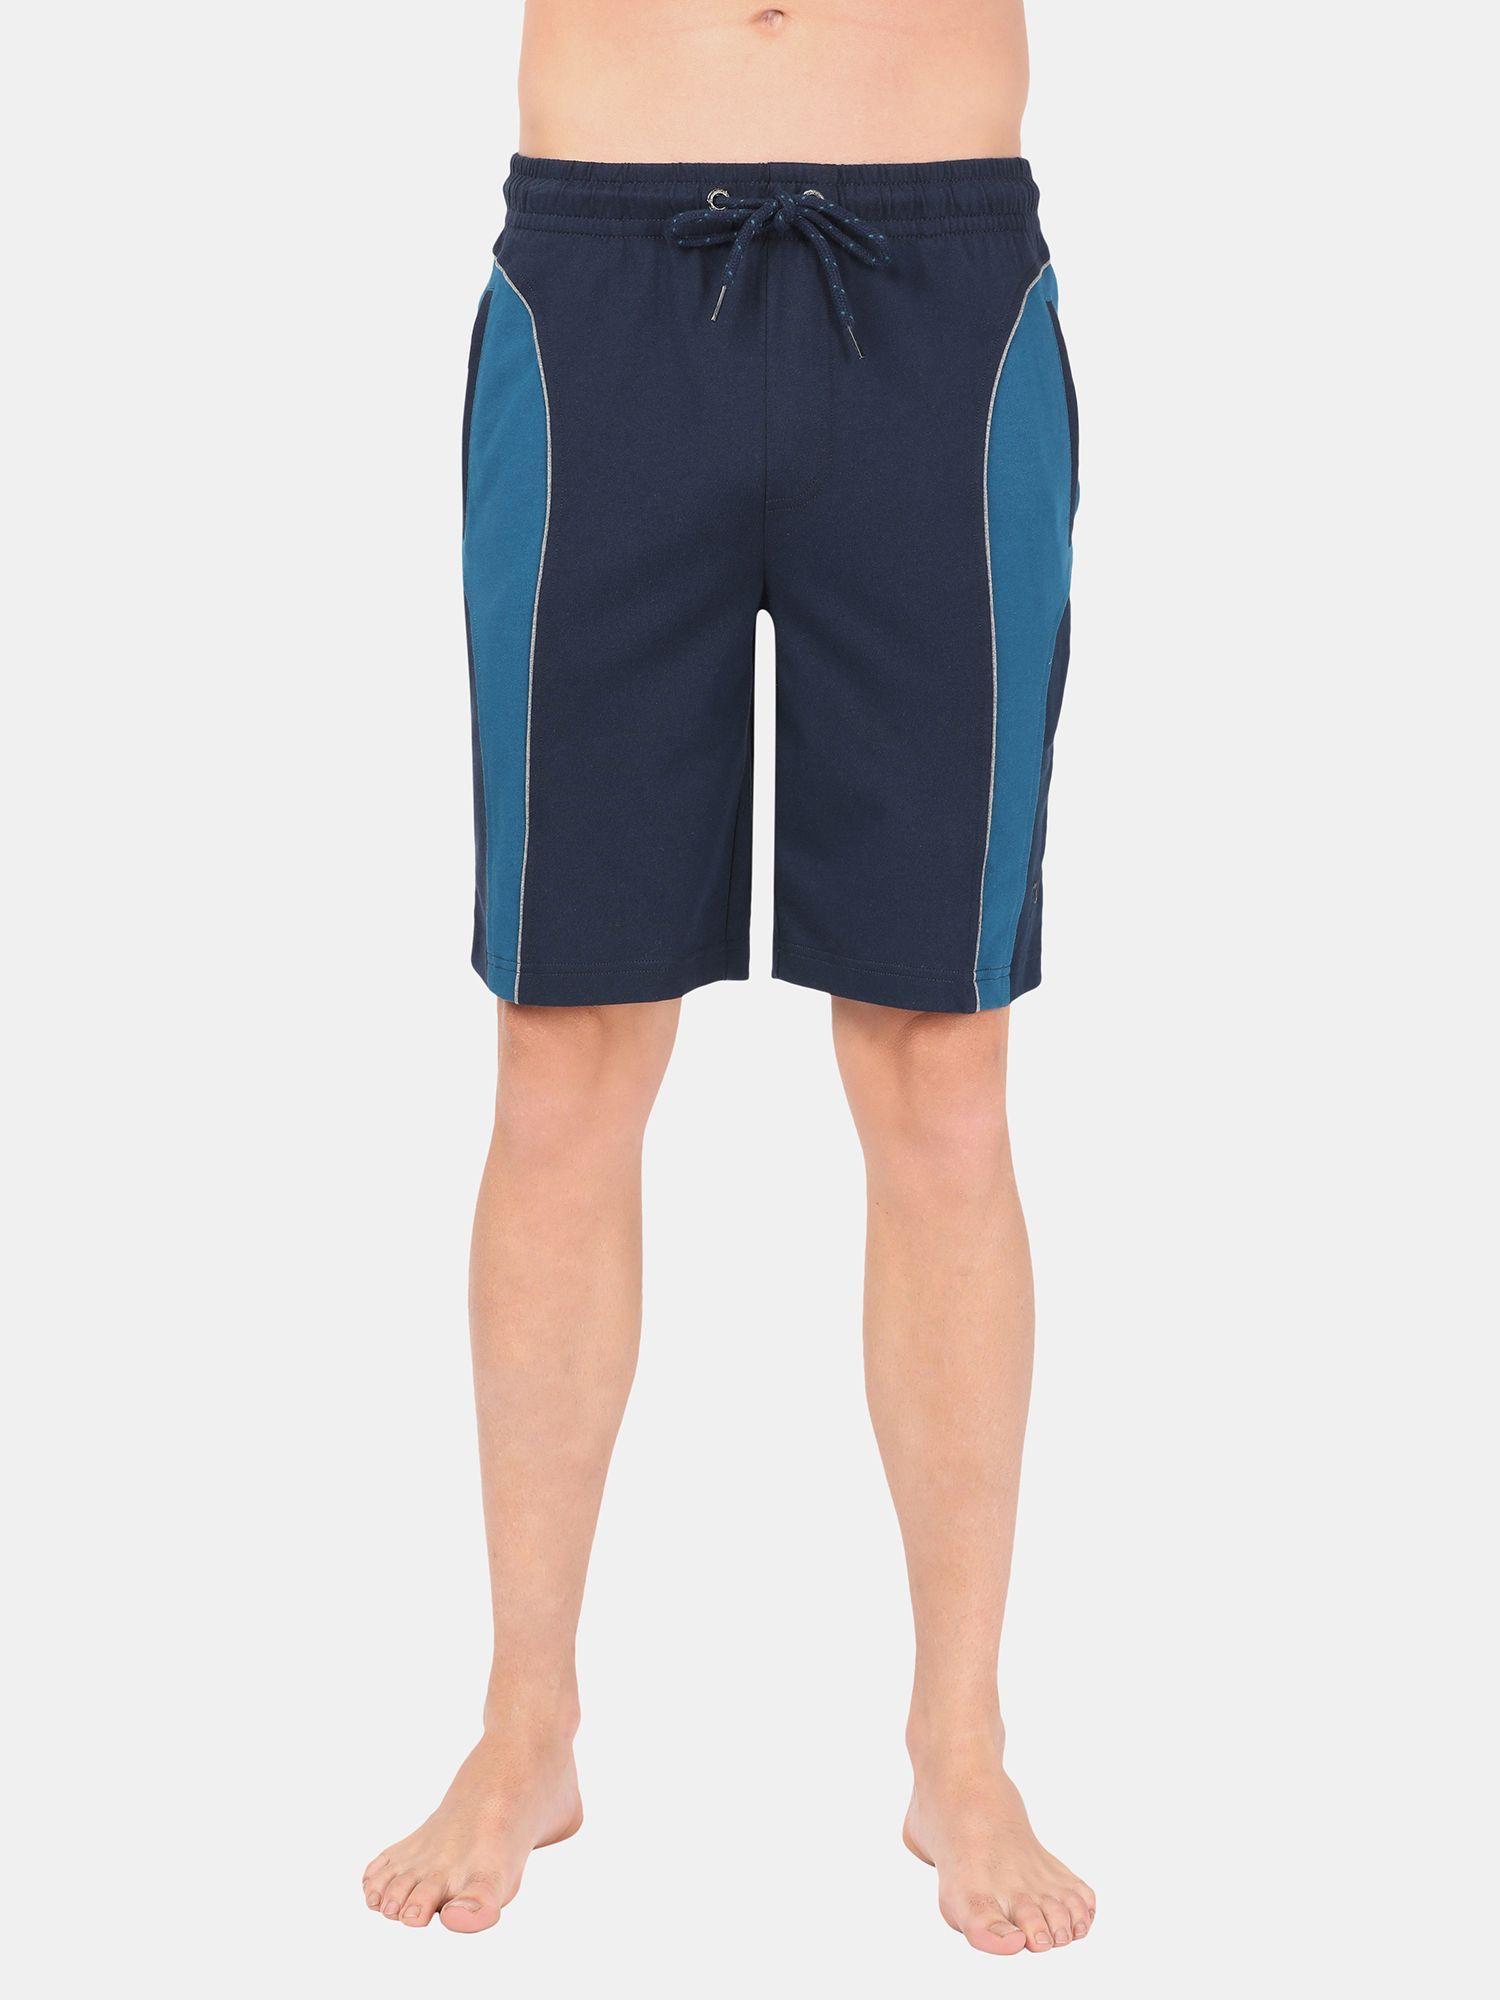 9411 mens super combed cotton rich straight fit solid shorts-navy & steller blue